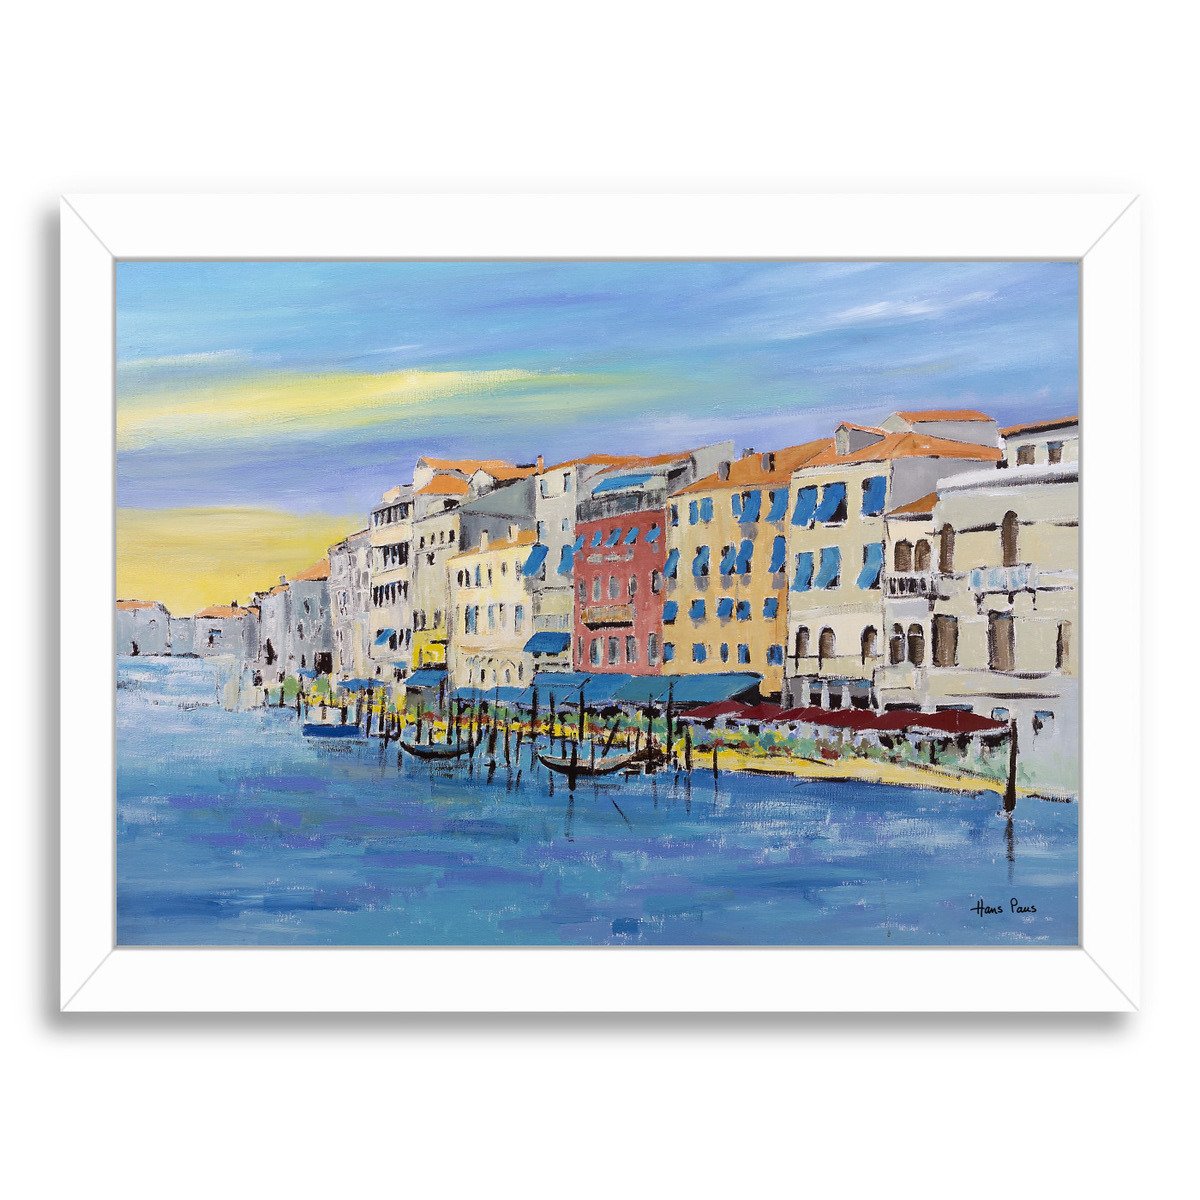 Venice By Hans Paus - Framed Print - Americanflat